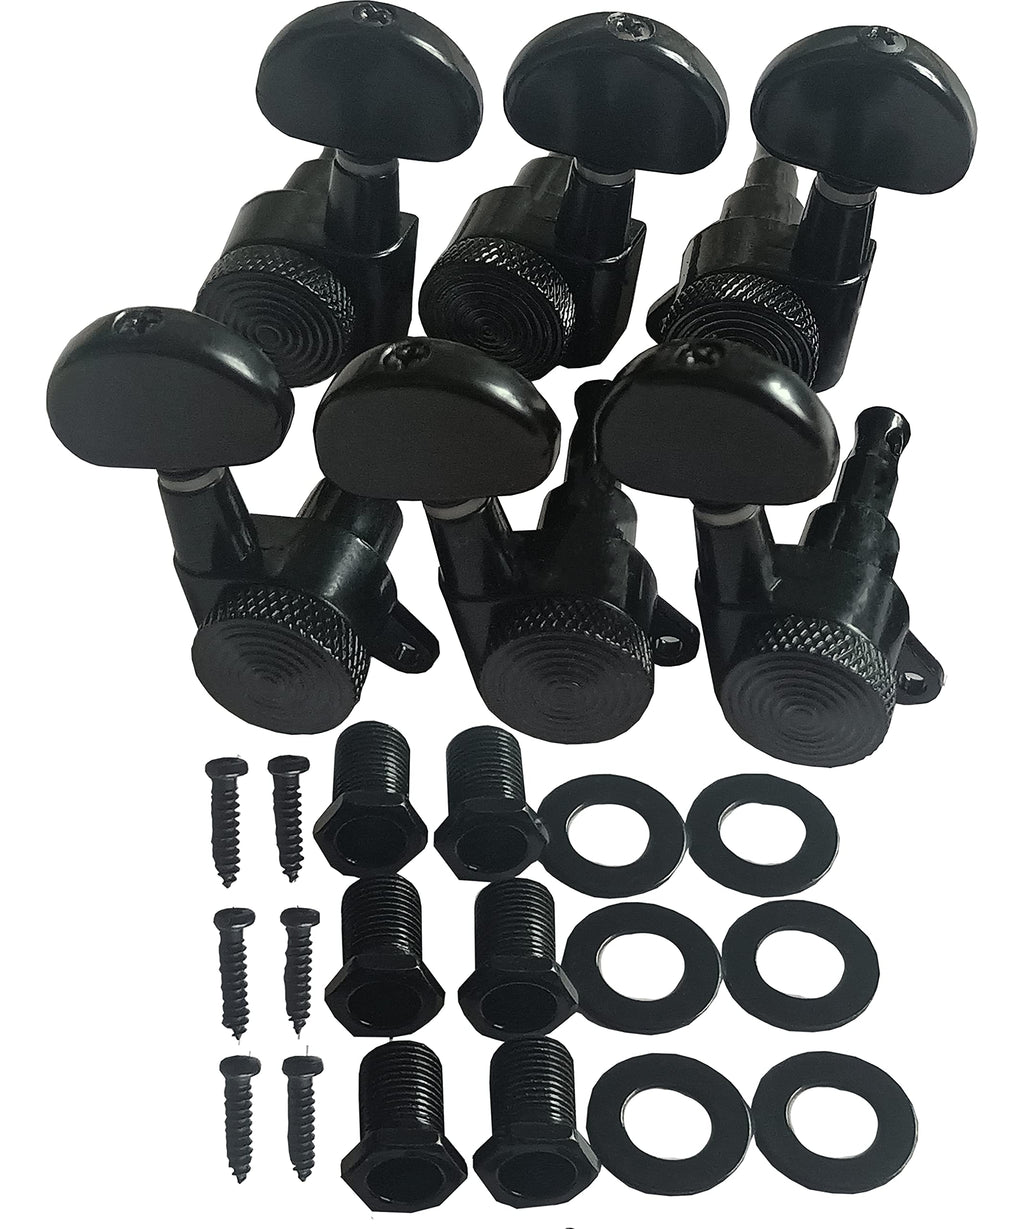 AYUBOUSA 6Pcs Guitar Locking Tuners (3L + 3R Handed) - 1:19 Lock String Sealed Tuning Key Pegs Machine Heads Set Replacement for ST TL SG LP Style Electric, Folk or Acoustic Guitars (Black) BK